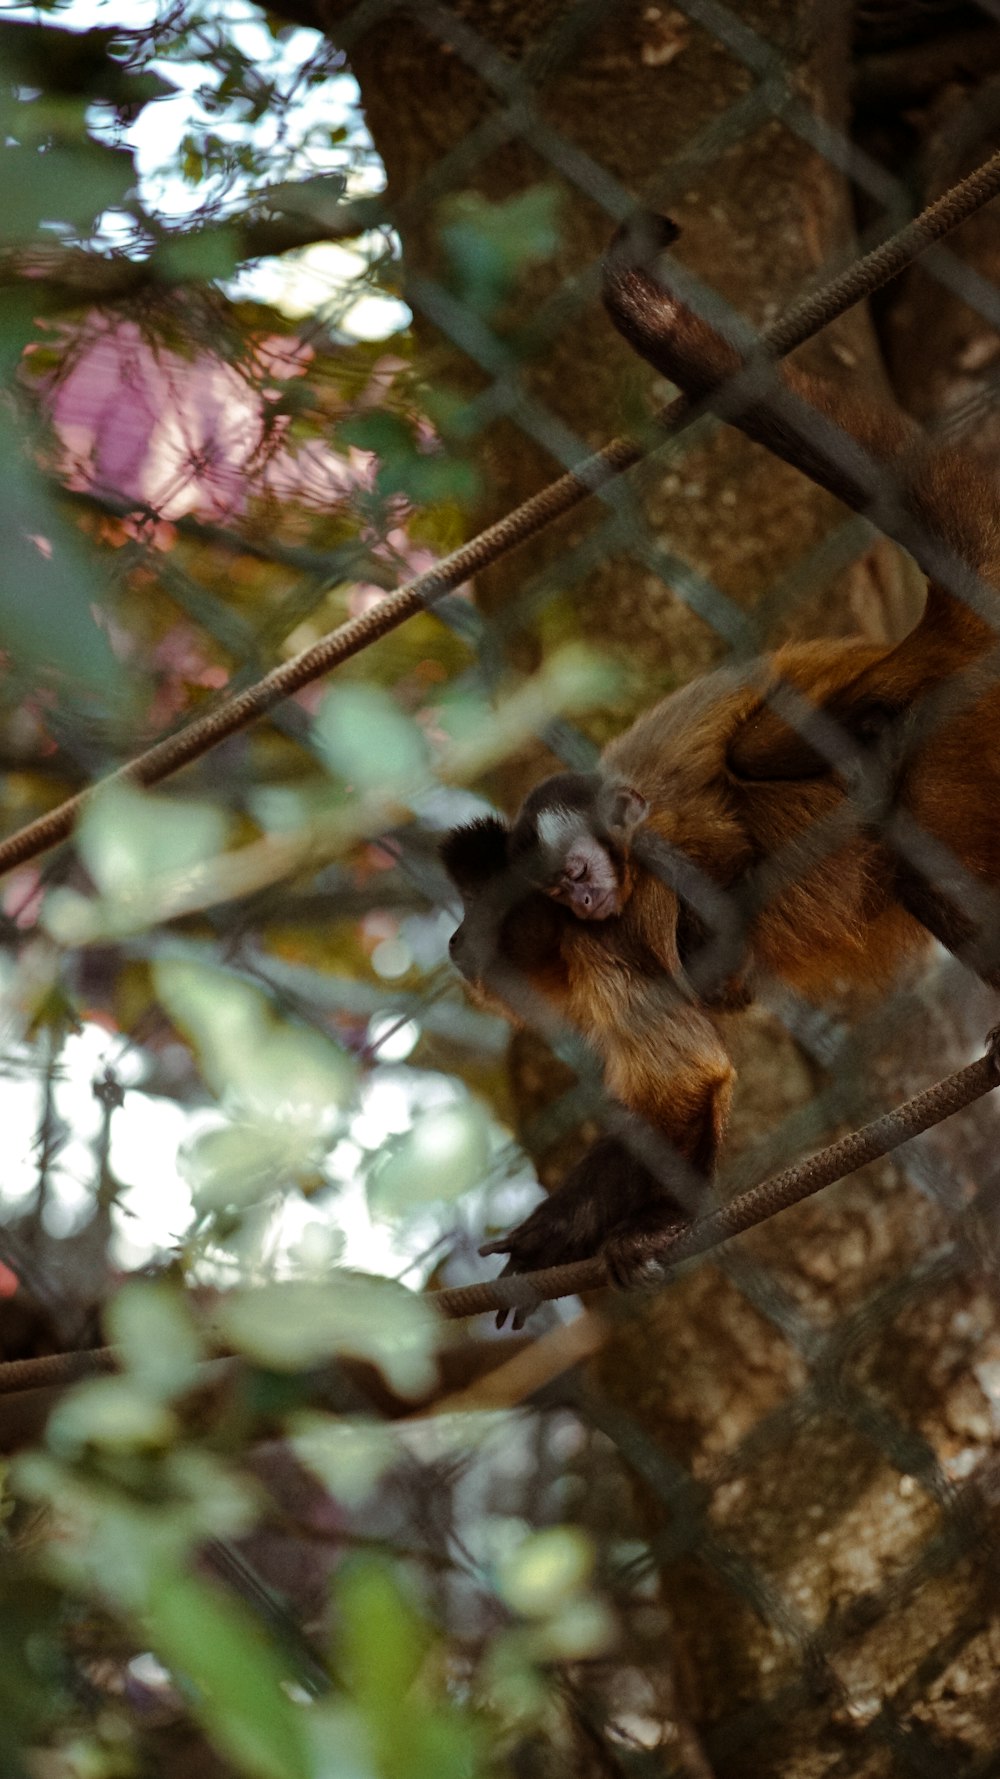 a monkey hanging on a tree branch behind a fence